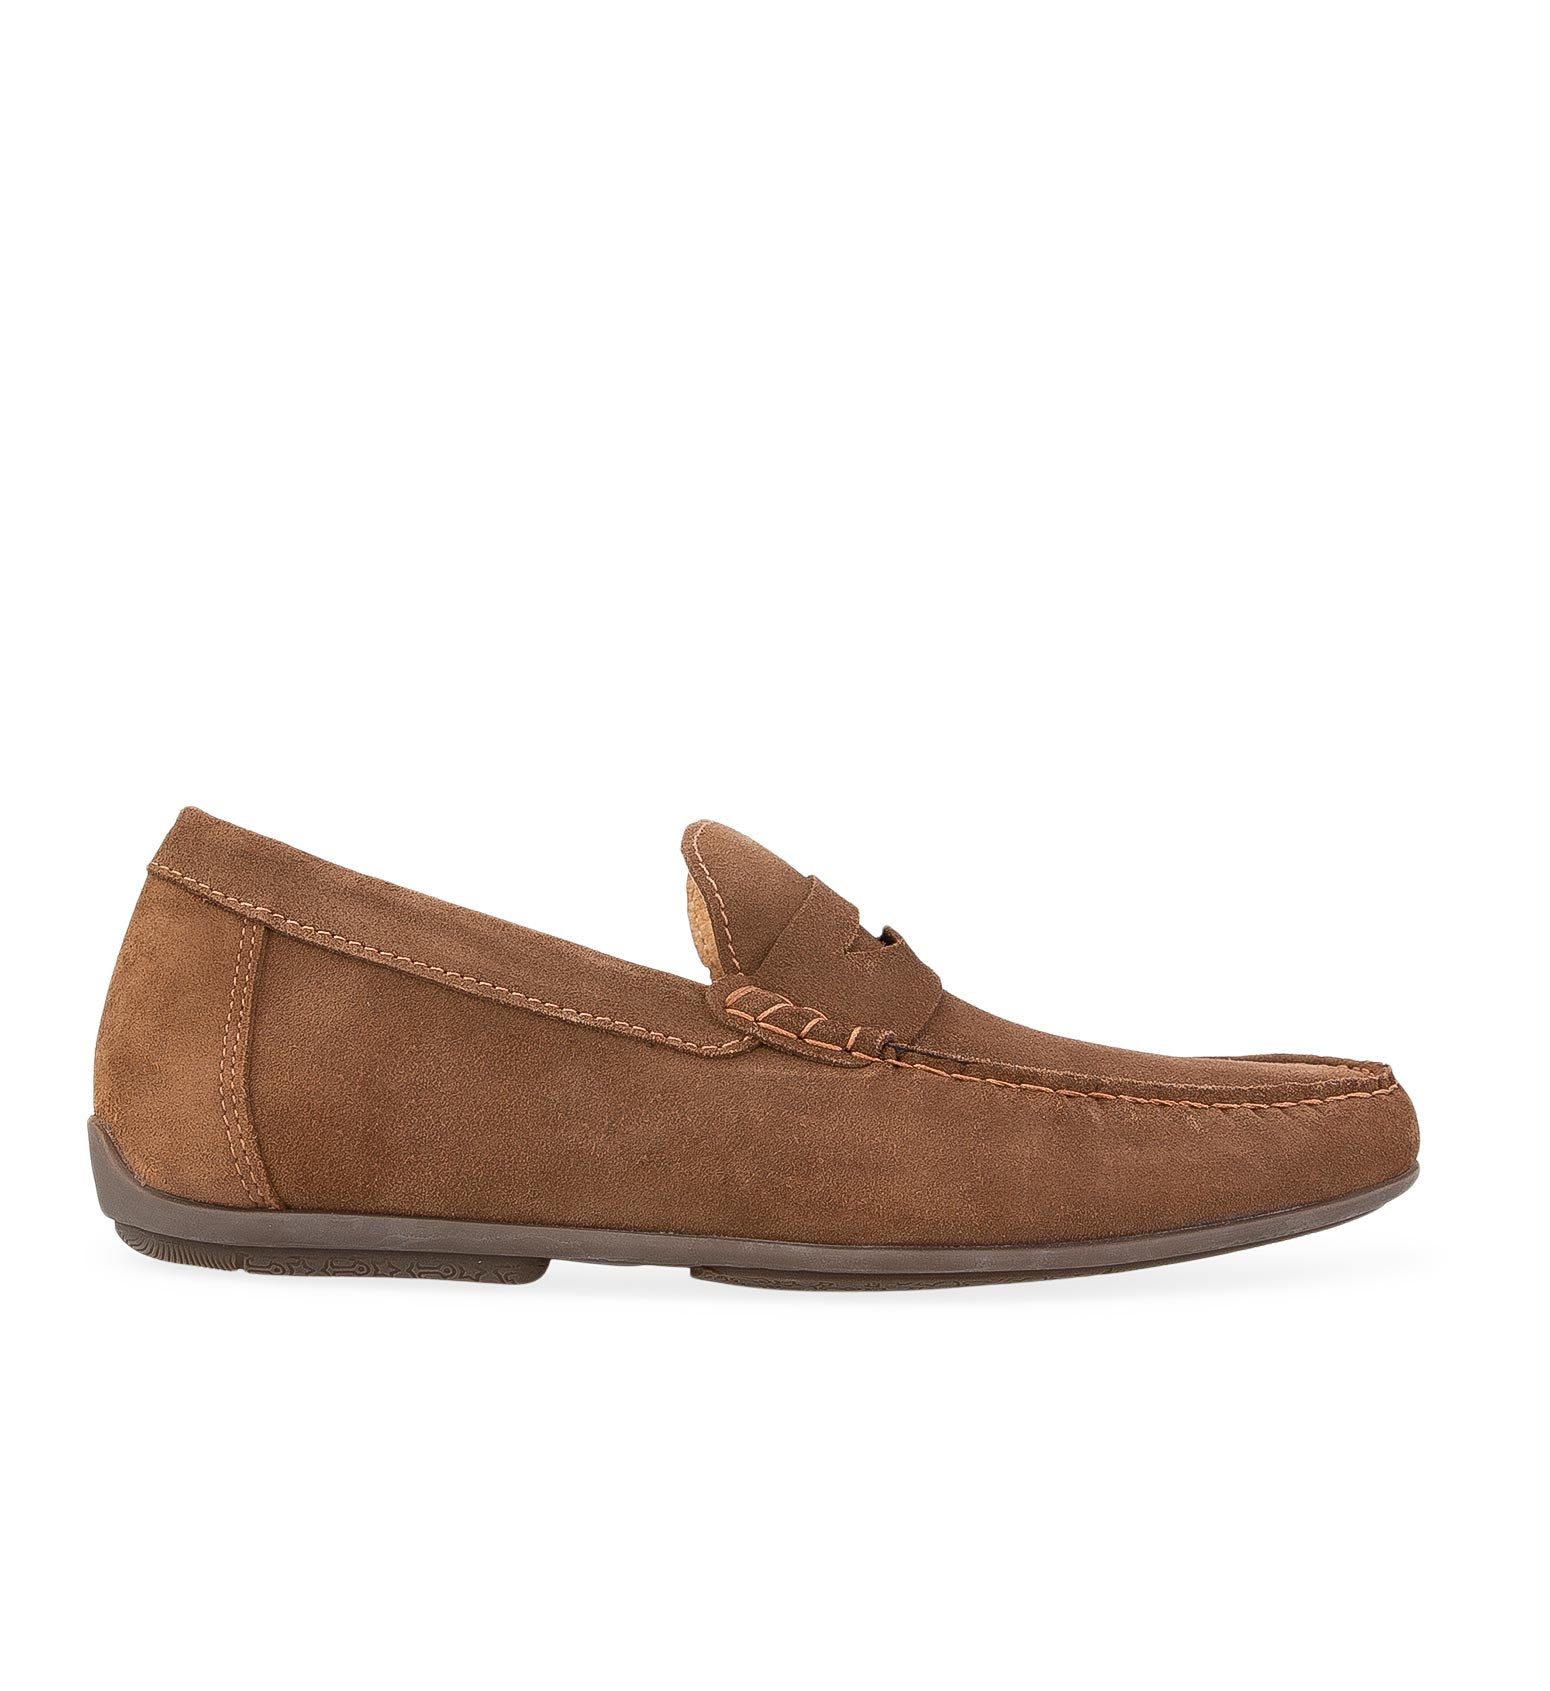 Neon Taupe Suede Loafers | Bared Footwear